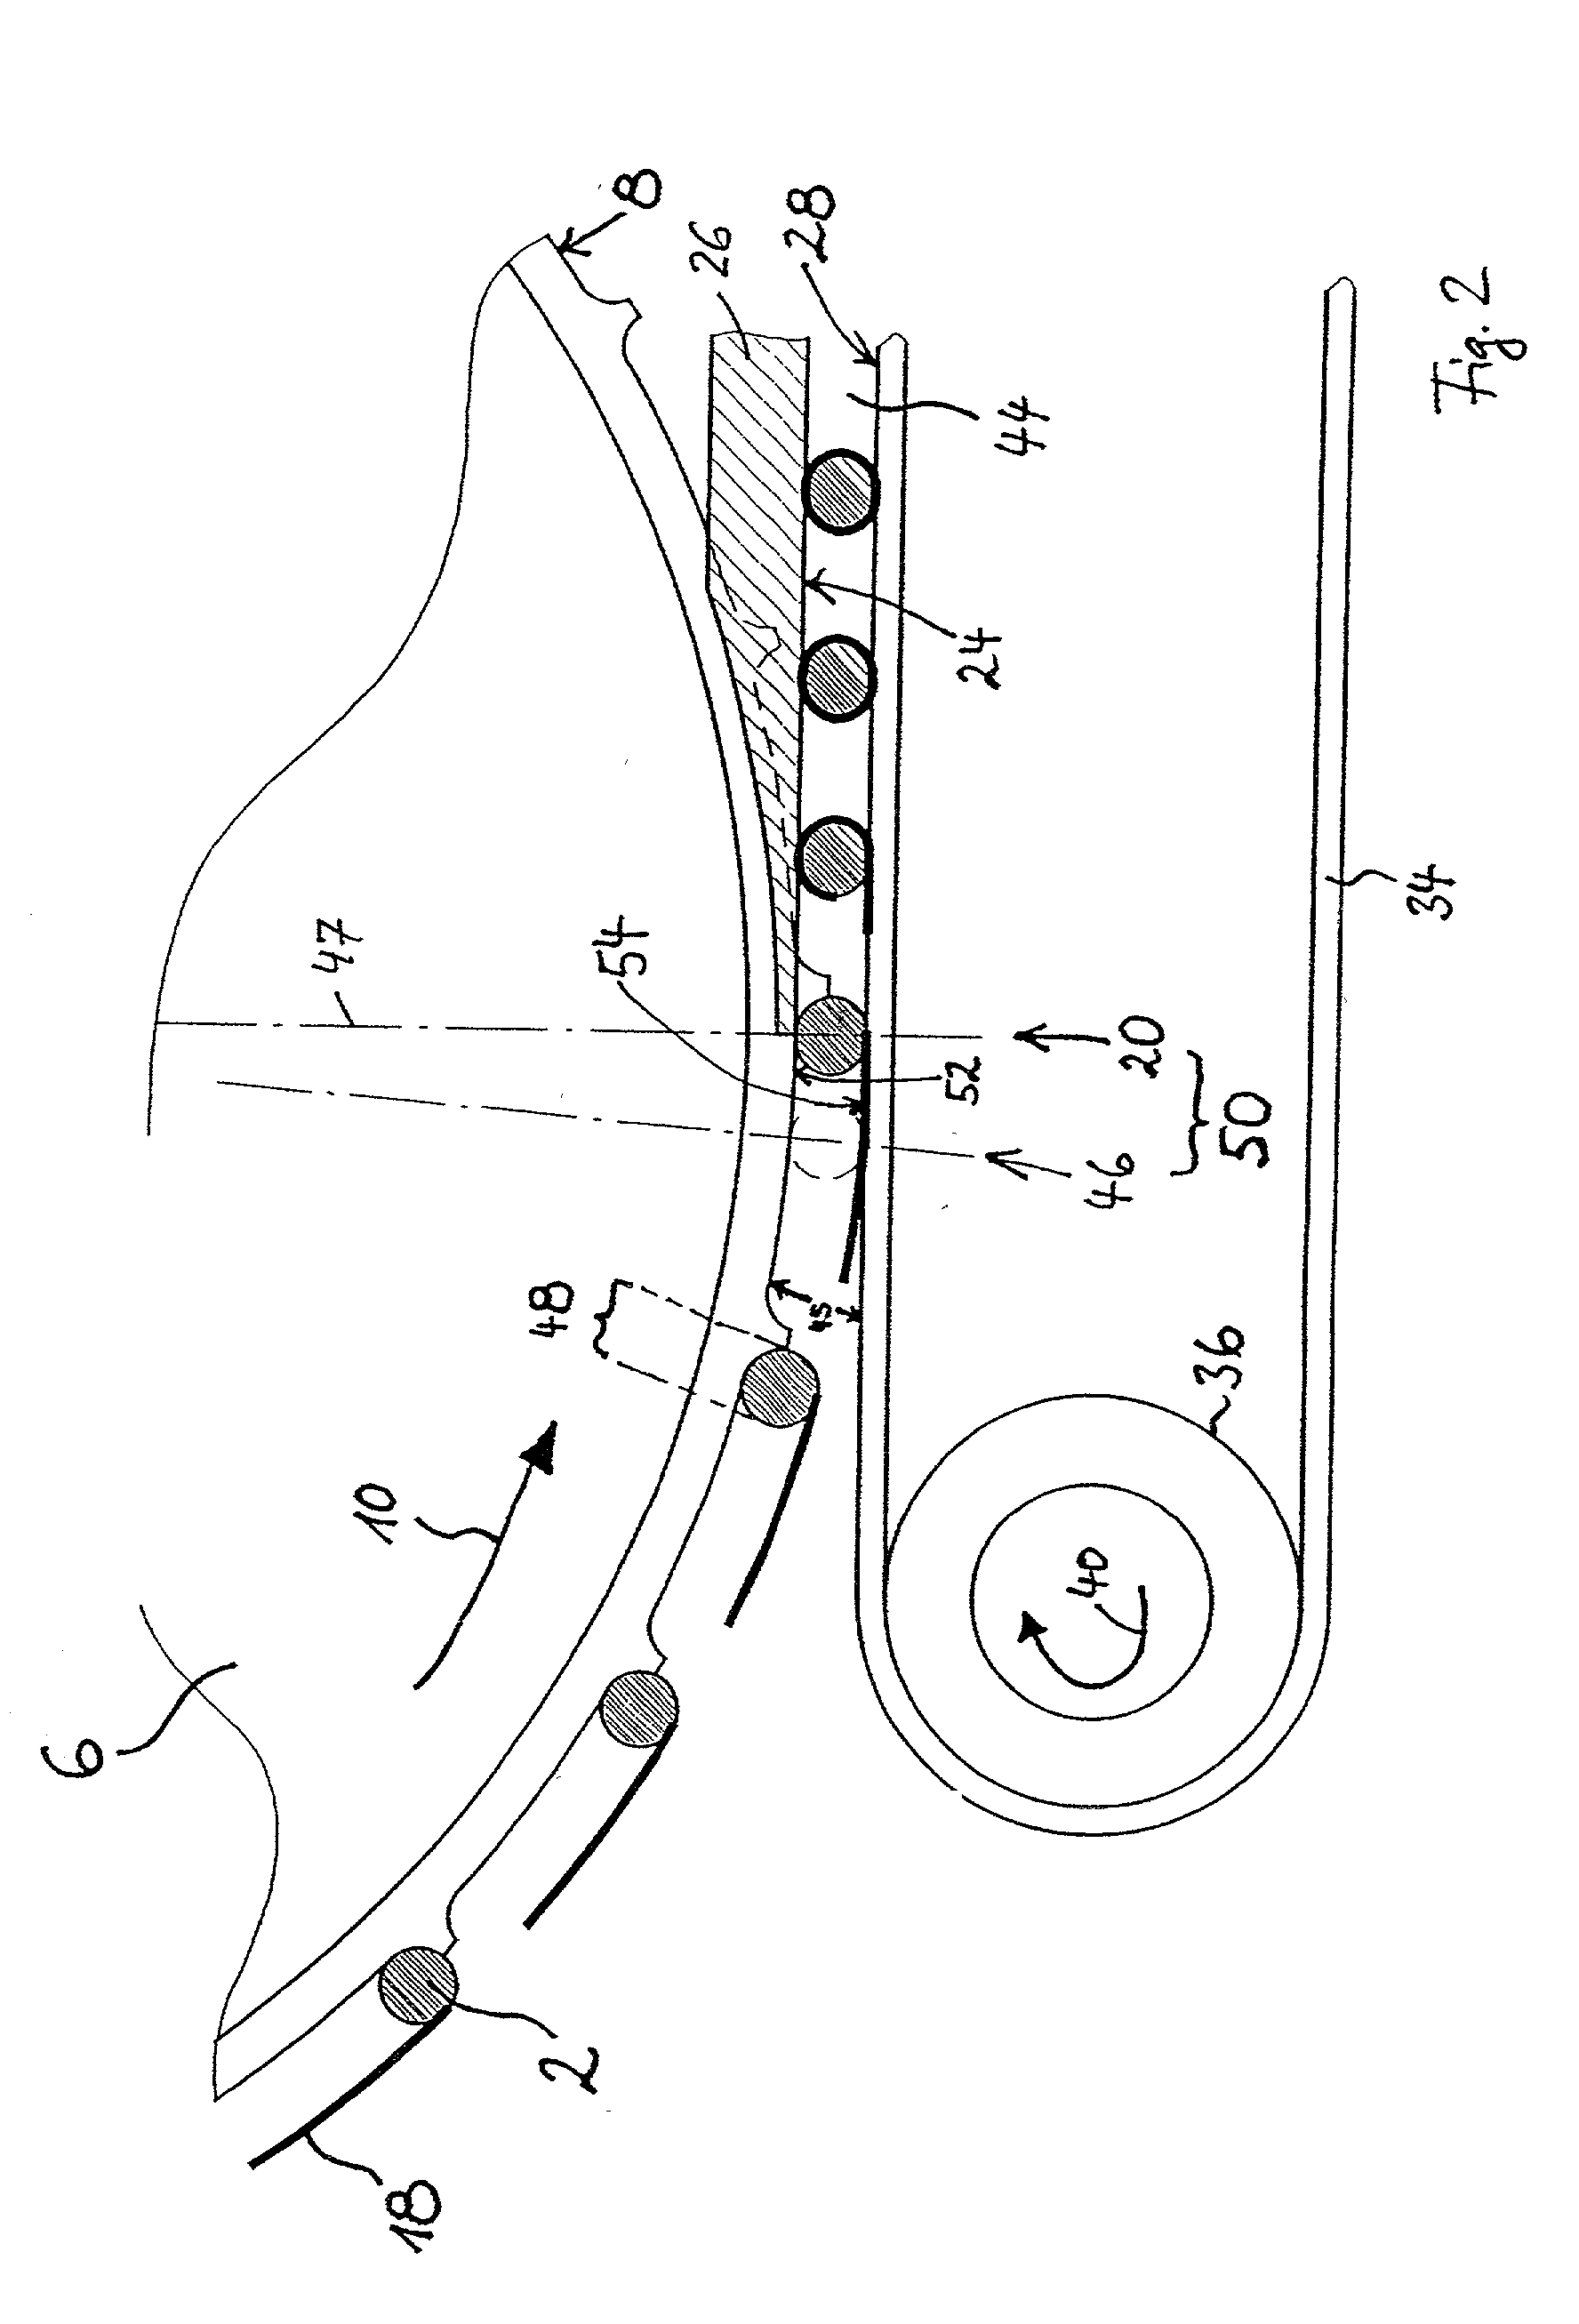 Method of and apparatus for convoluting bands around rod-shaped articles